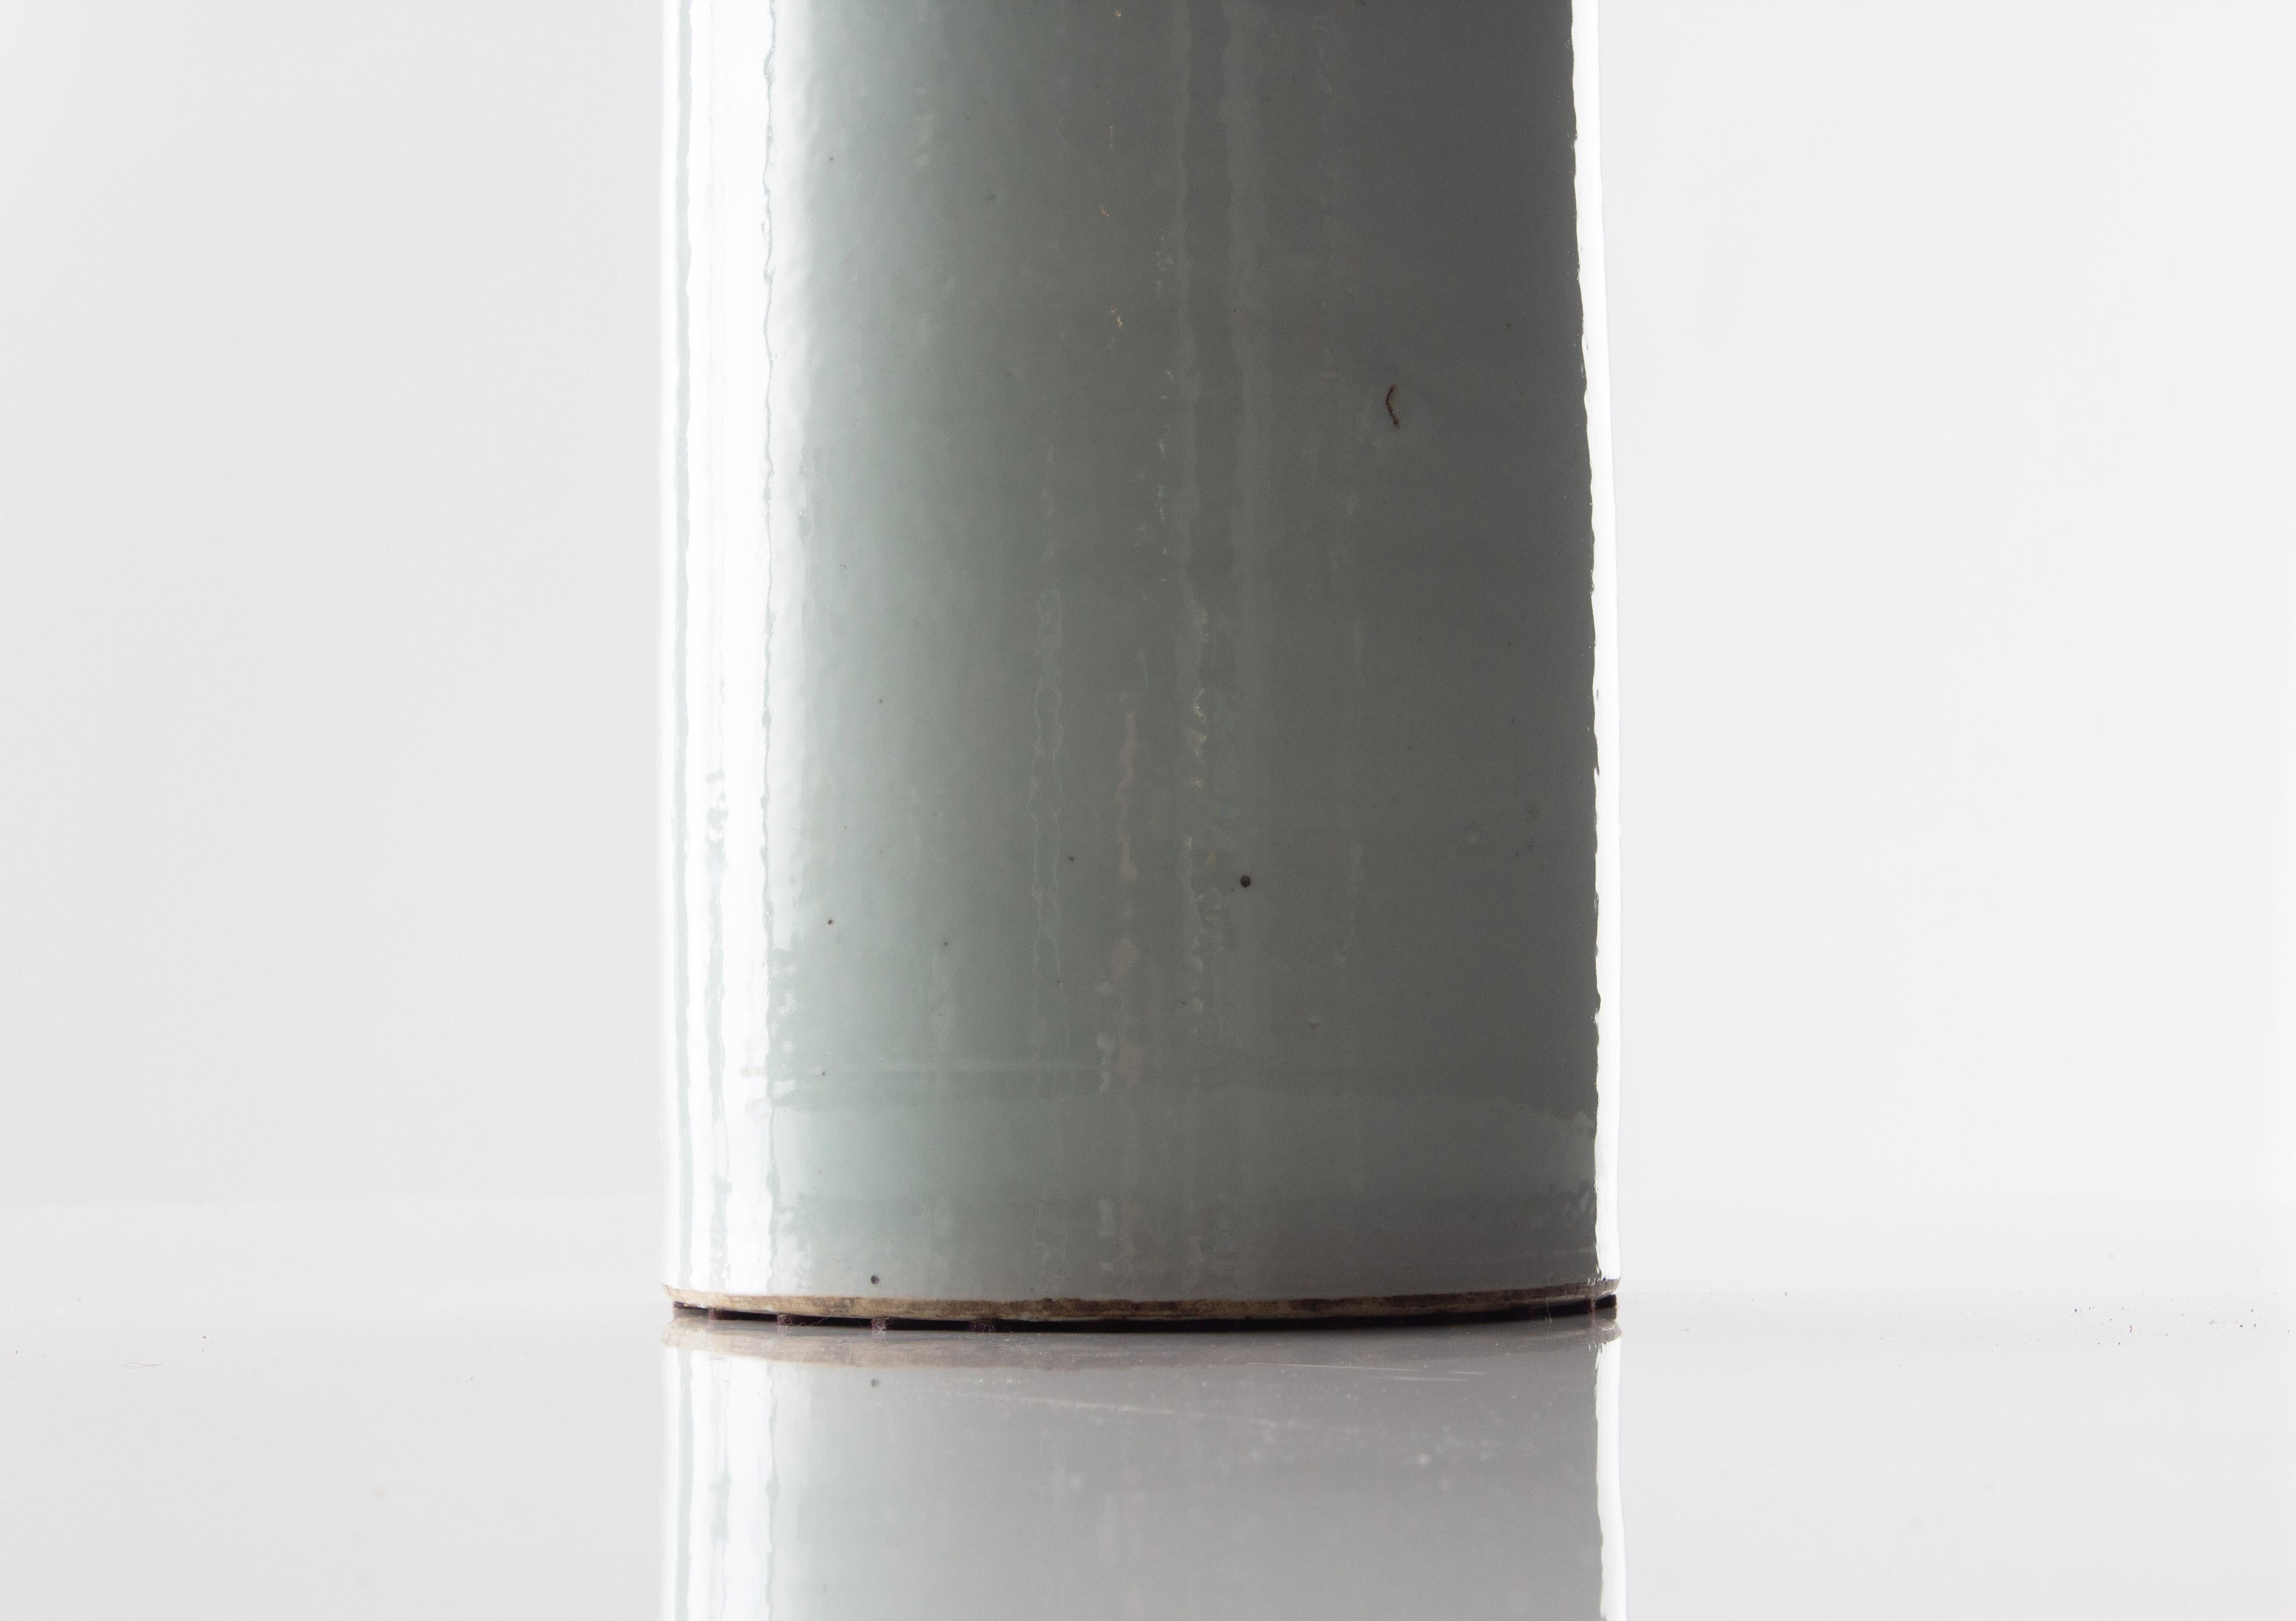 Celadon Storage Vessel

Piece from our one-of-a-kind collection, Le Monde. Exclusive to Brendan Bass.   

Globally curated by Brendan Bass, Le Monde furniture and accessories offer modern sensibility, provincial construction, and unparalleled